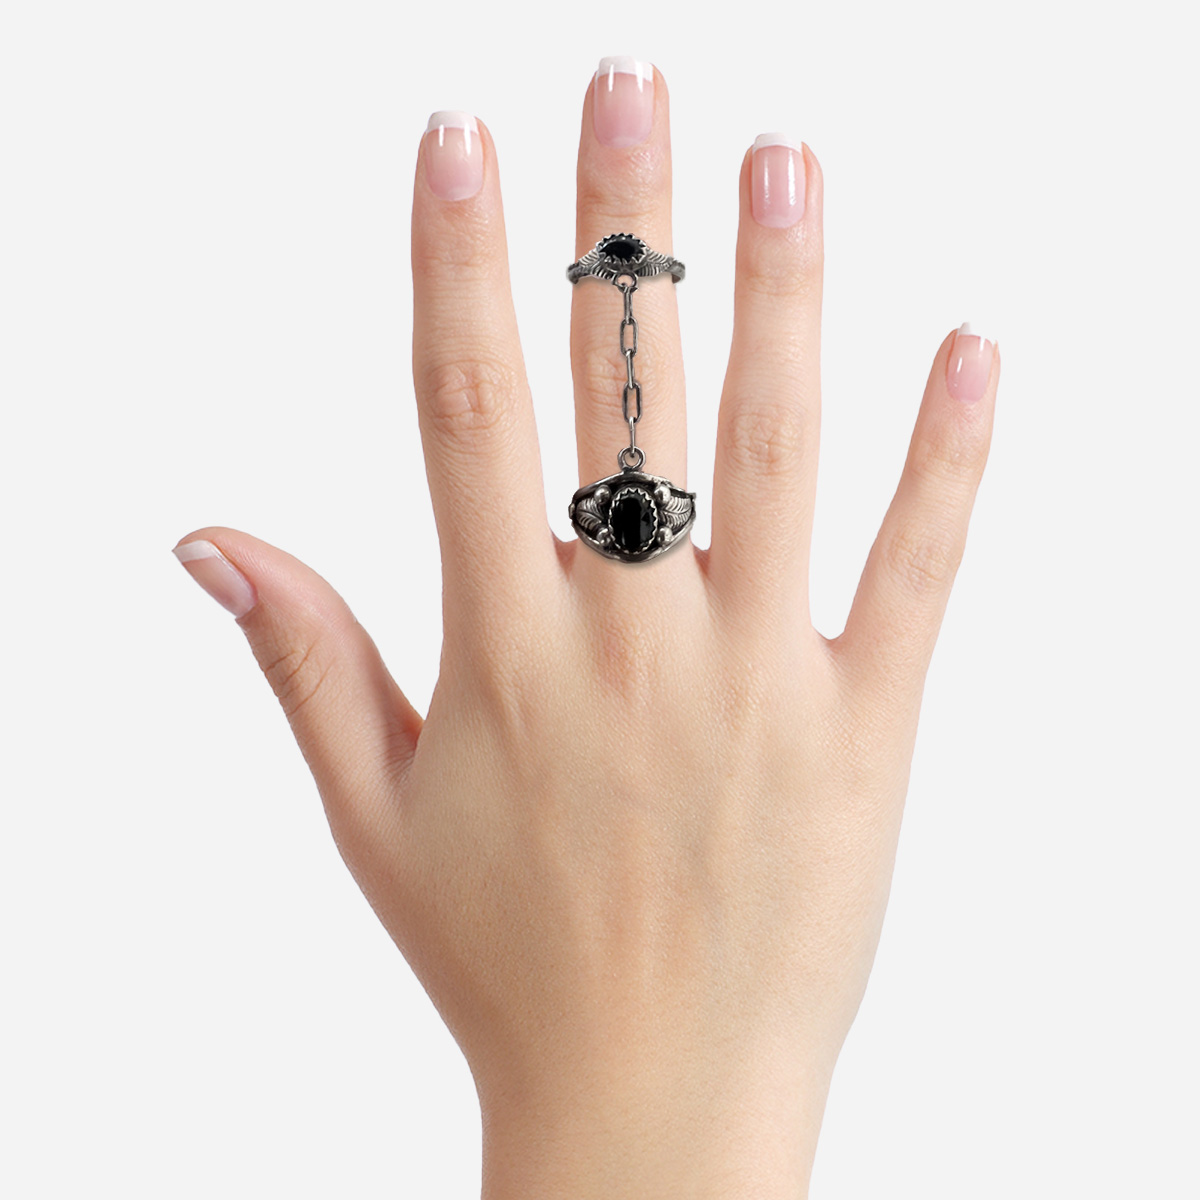 Vintage sterling silver double onyx ring with chain